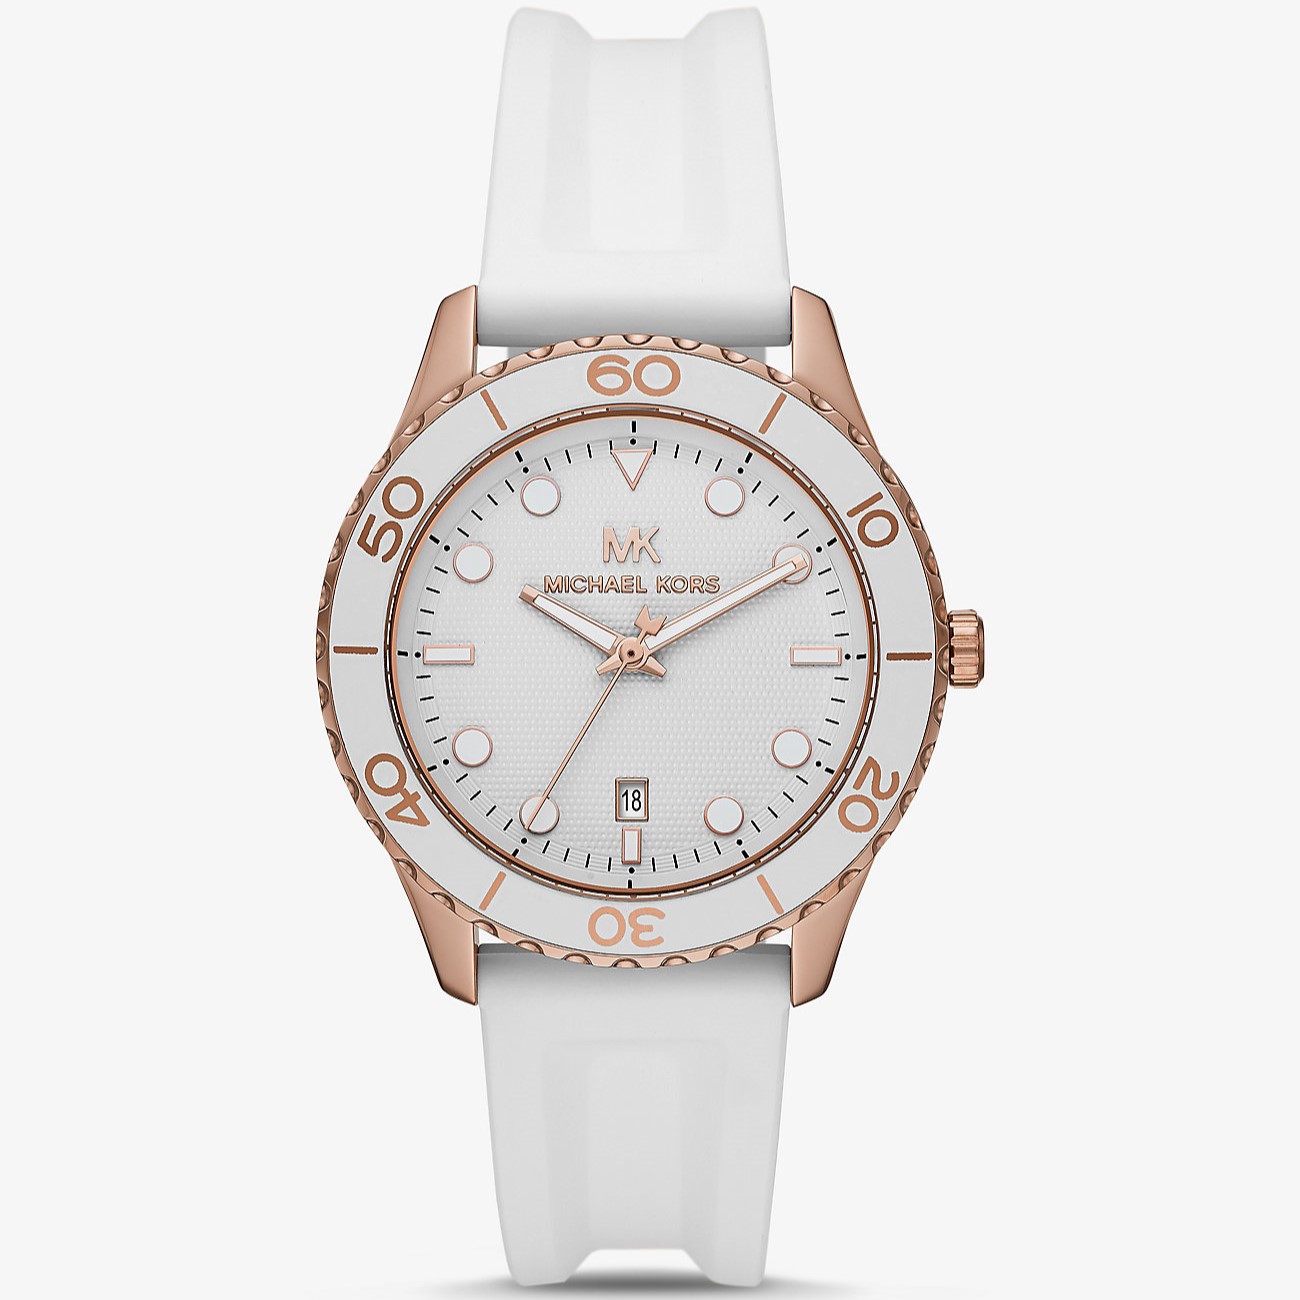 ĐỒNG HỒ ĐEO TAY MICHAEL KORS RUNWAY DIVE OVERSIZED ROSE GOLD-TONE SILICONE STRAP WATCH MK6853 9